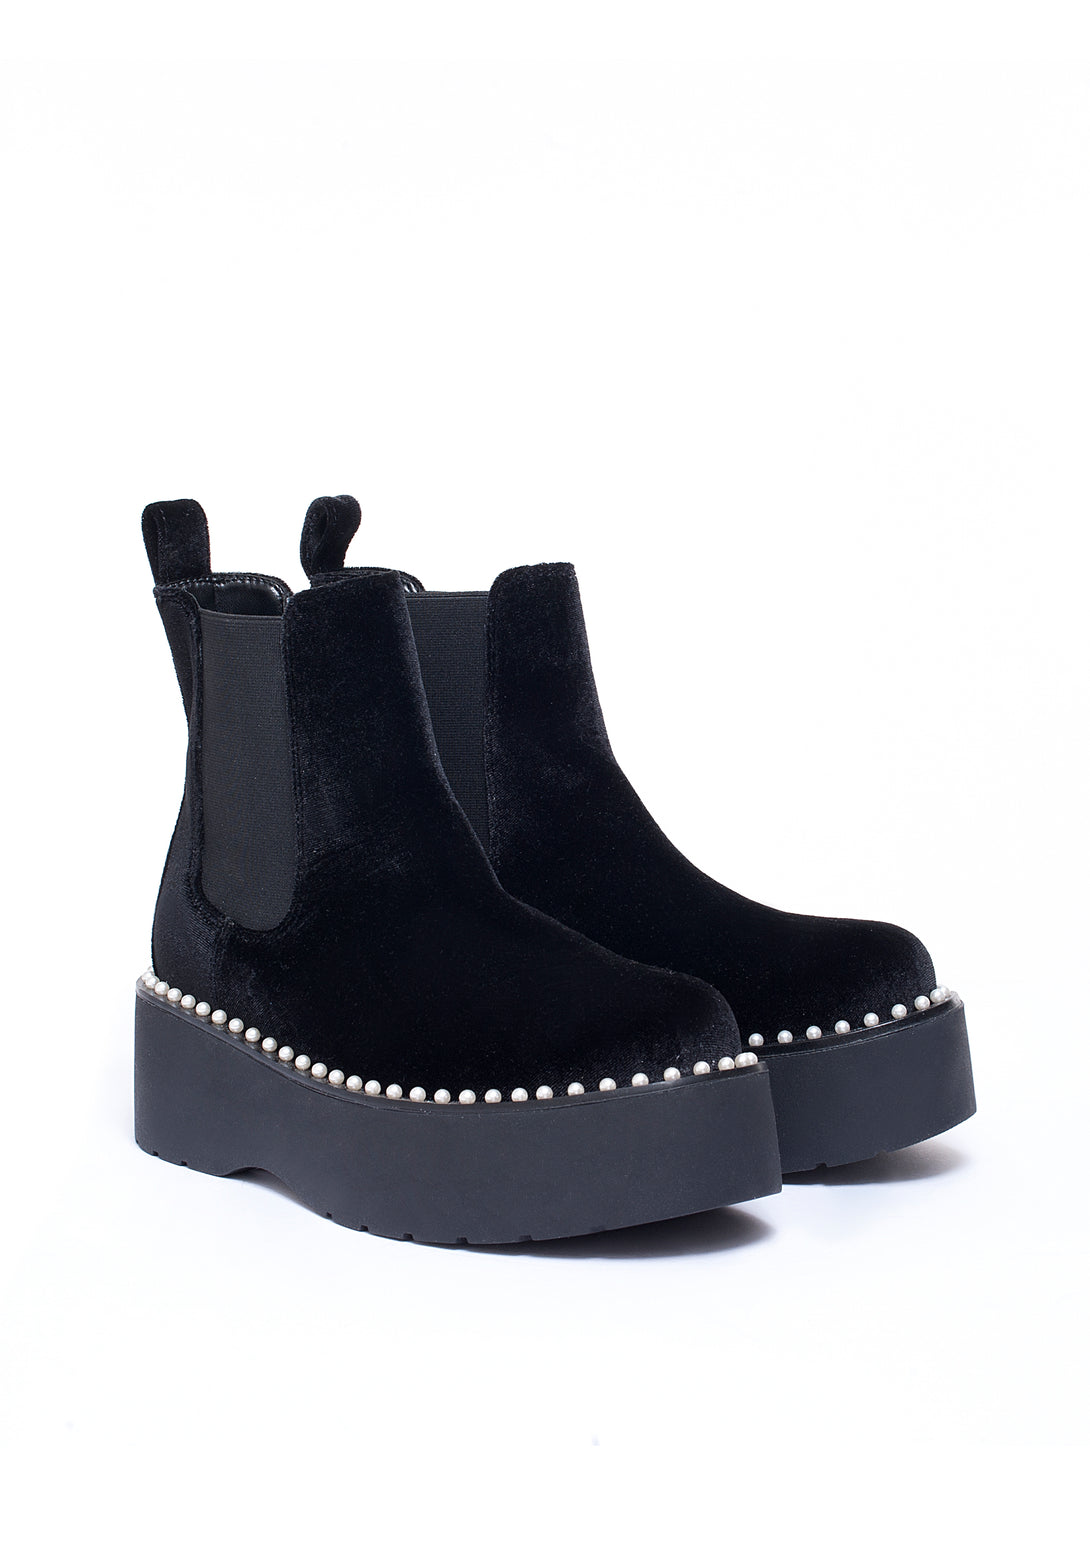 Chelsea boot made in velvet with pearls